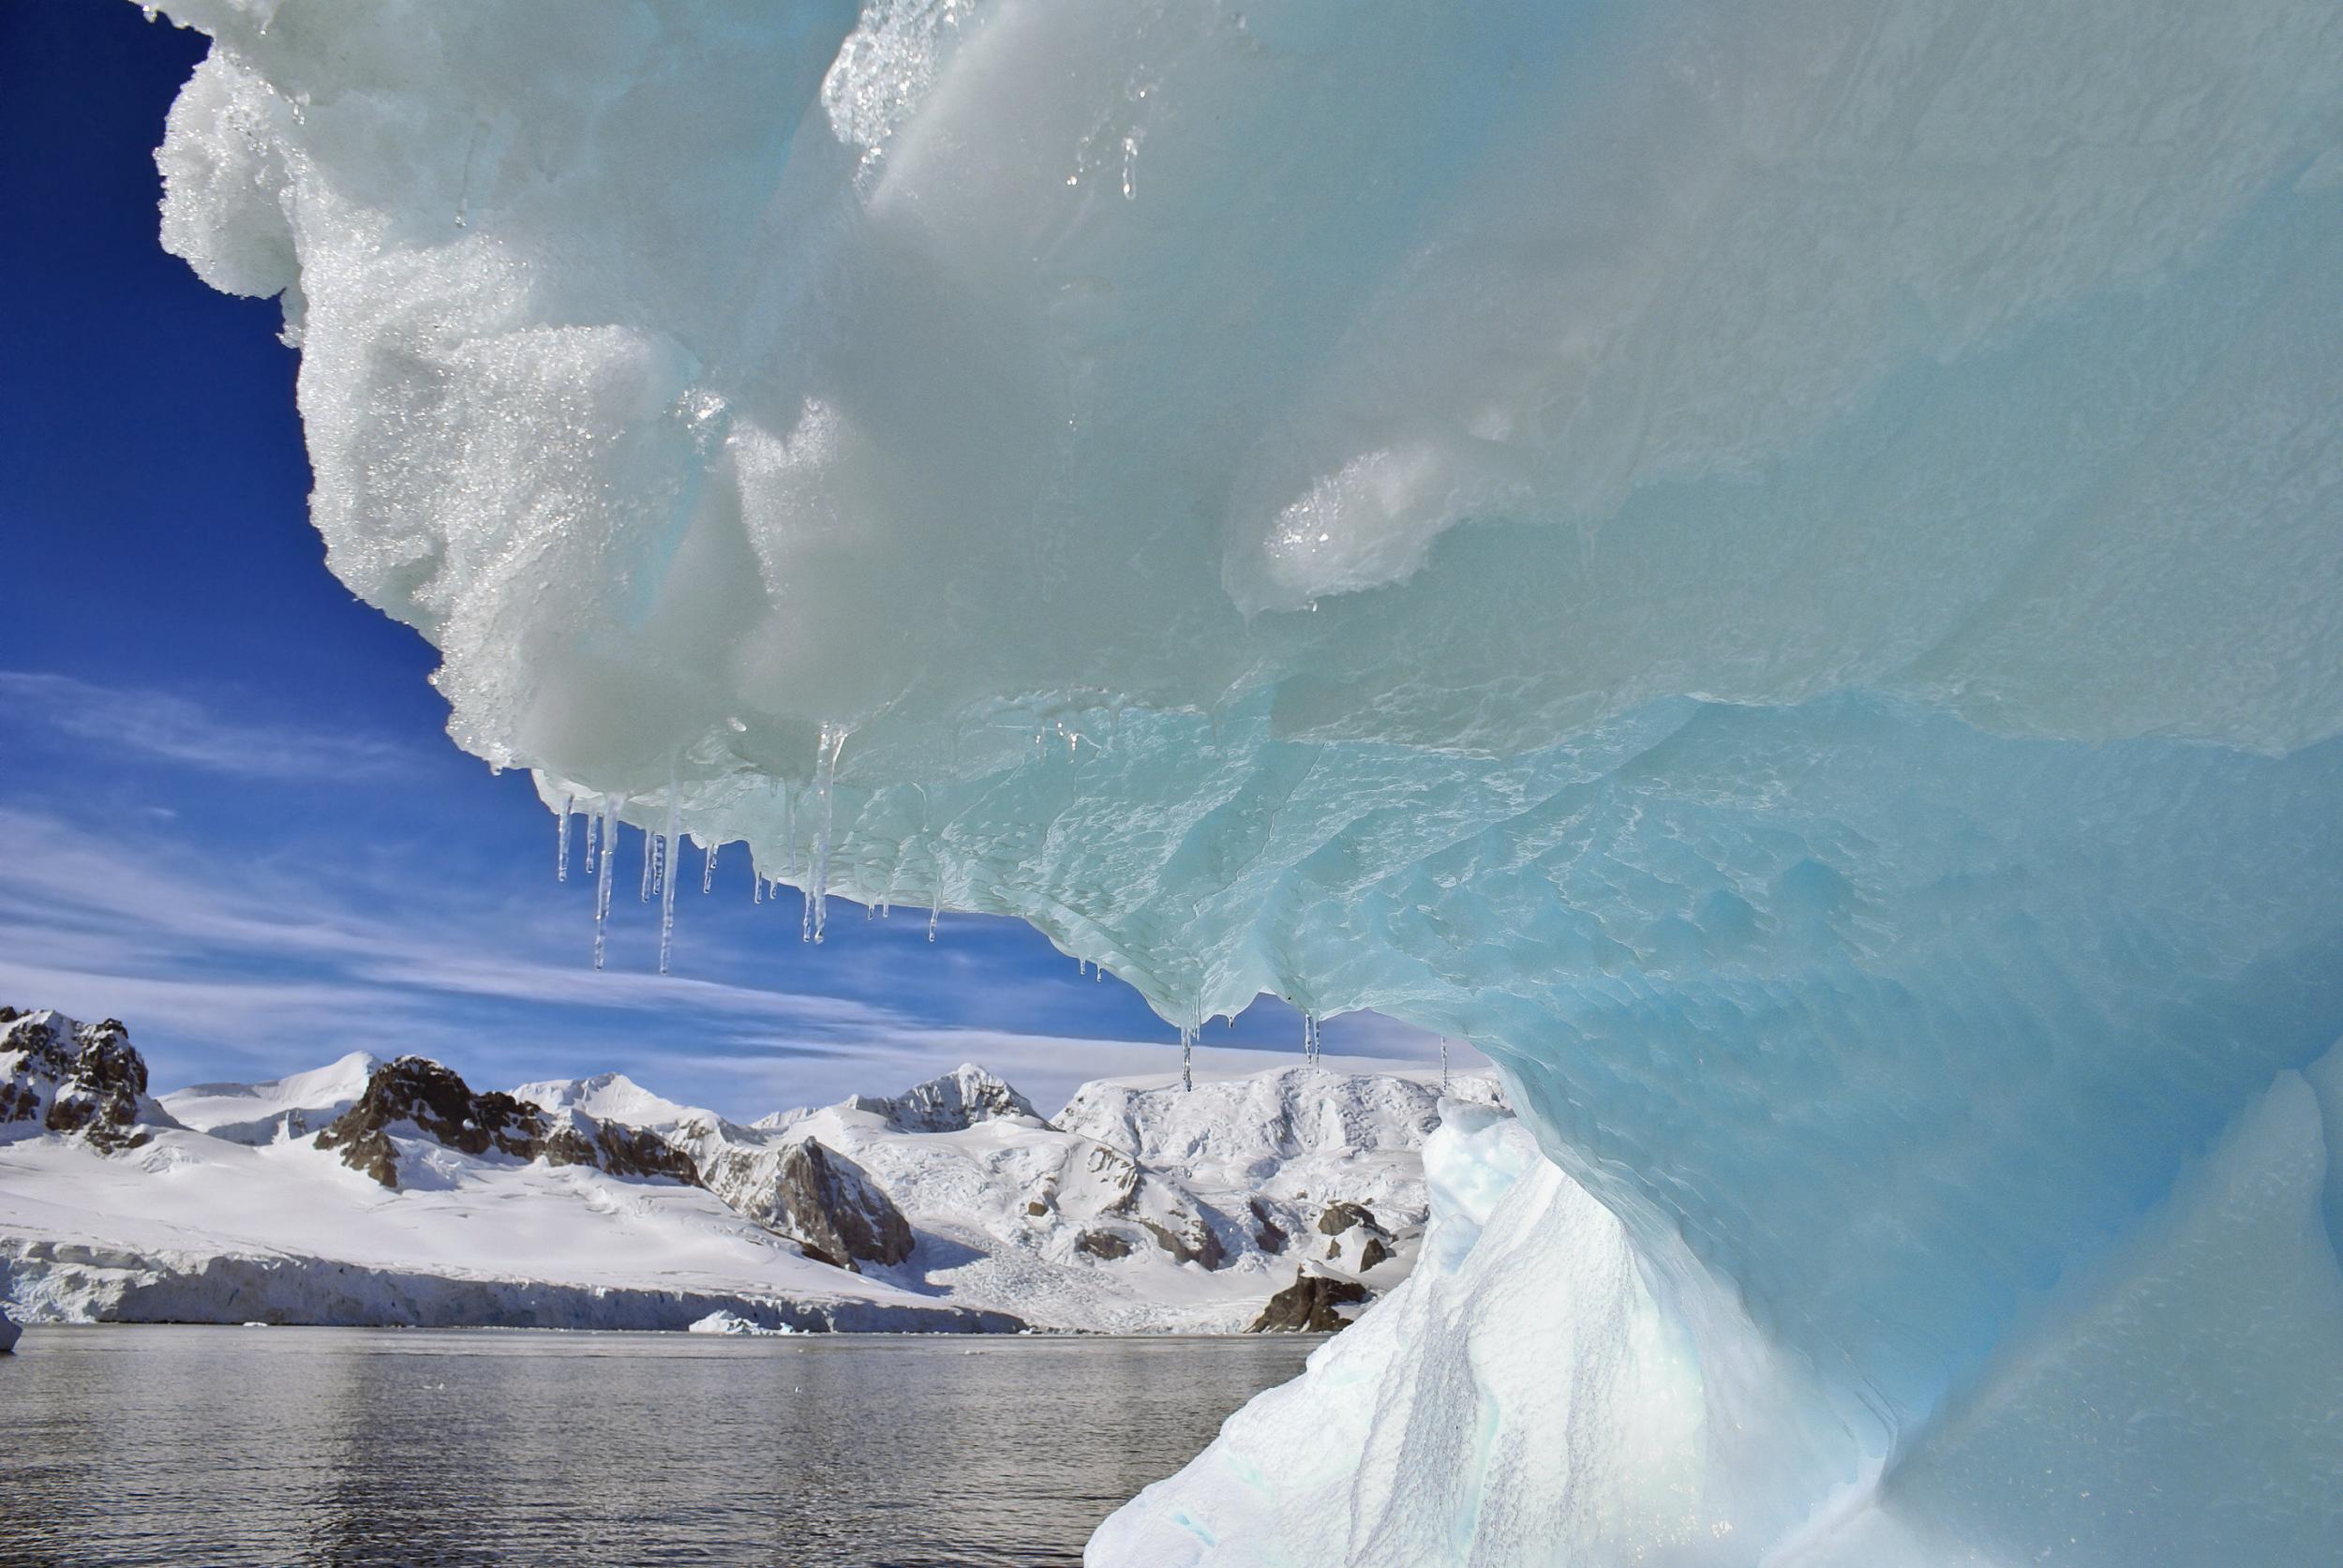 Antarctica is so vast and remote that satellites are the only means of monitoring its behaviour on a continental scale